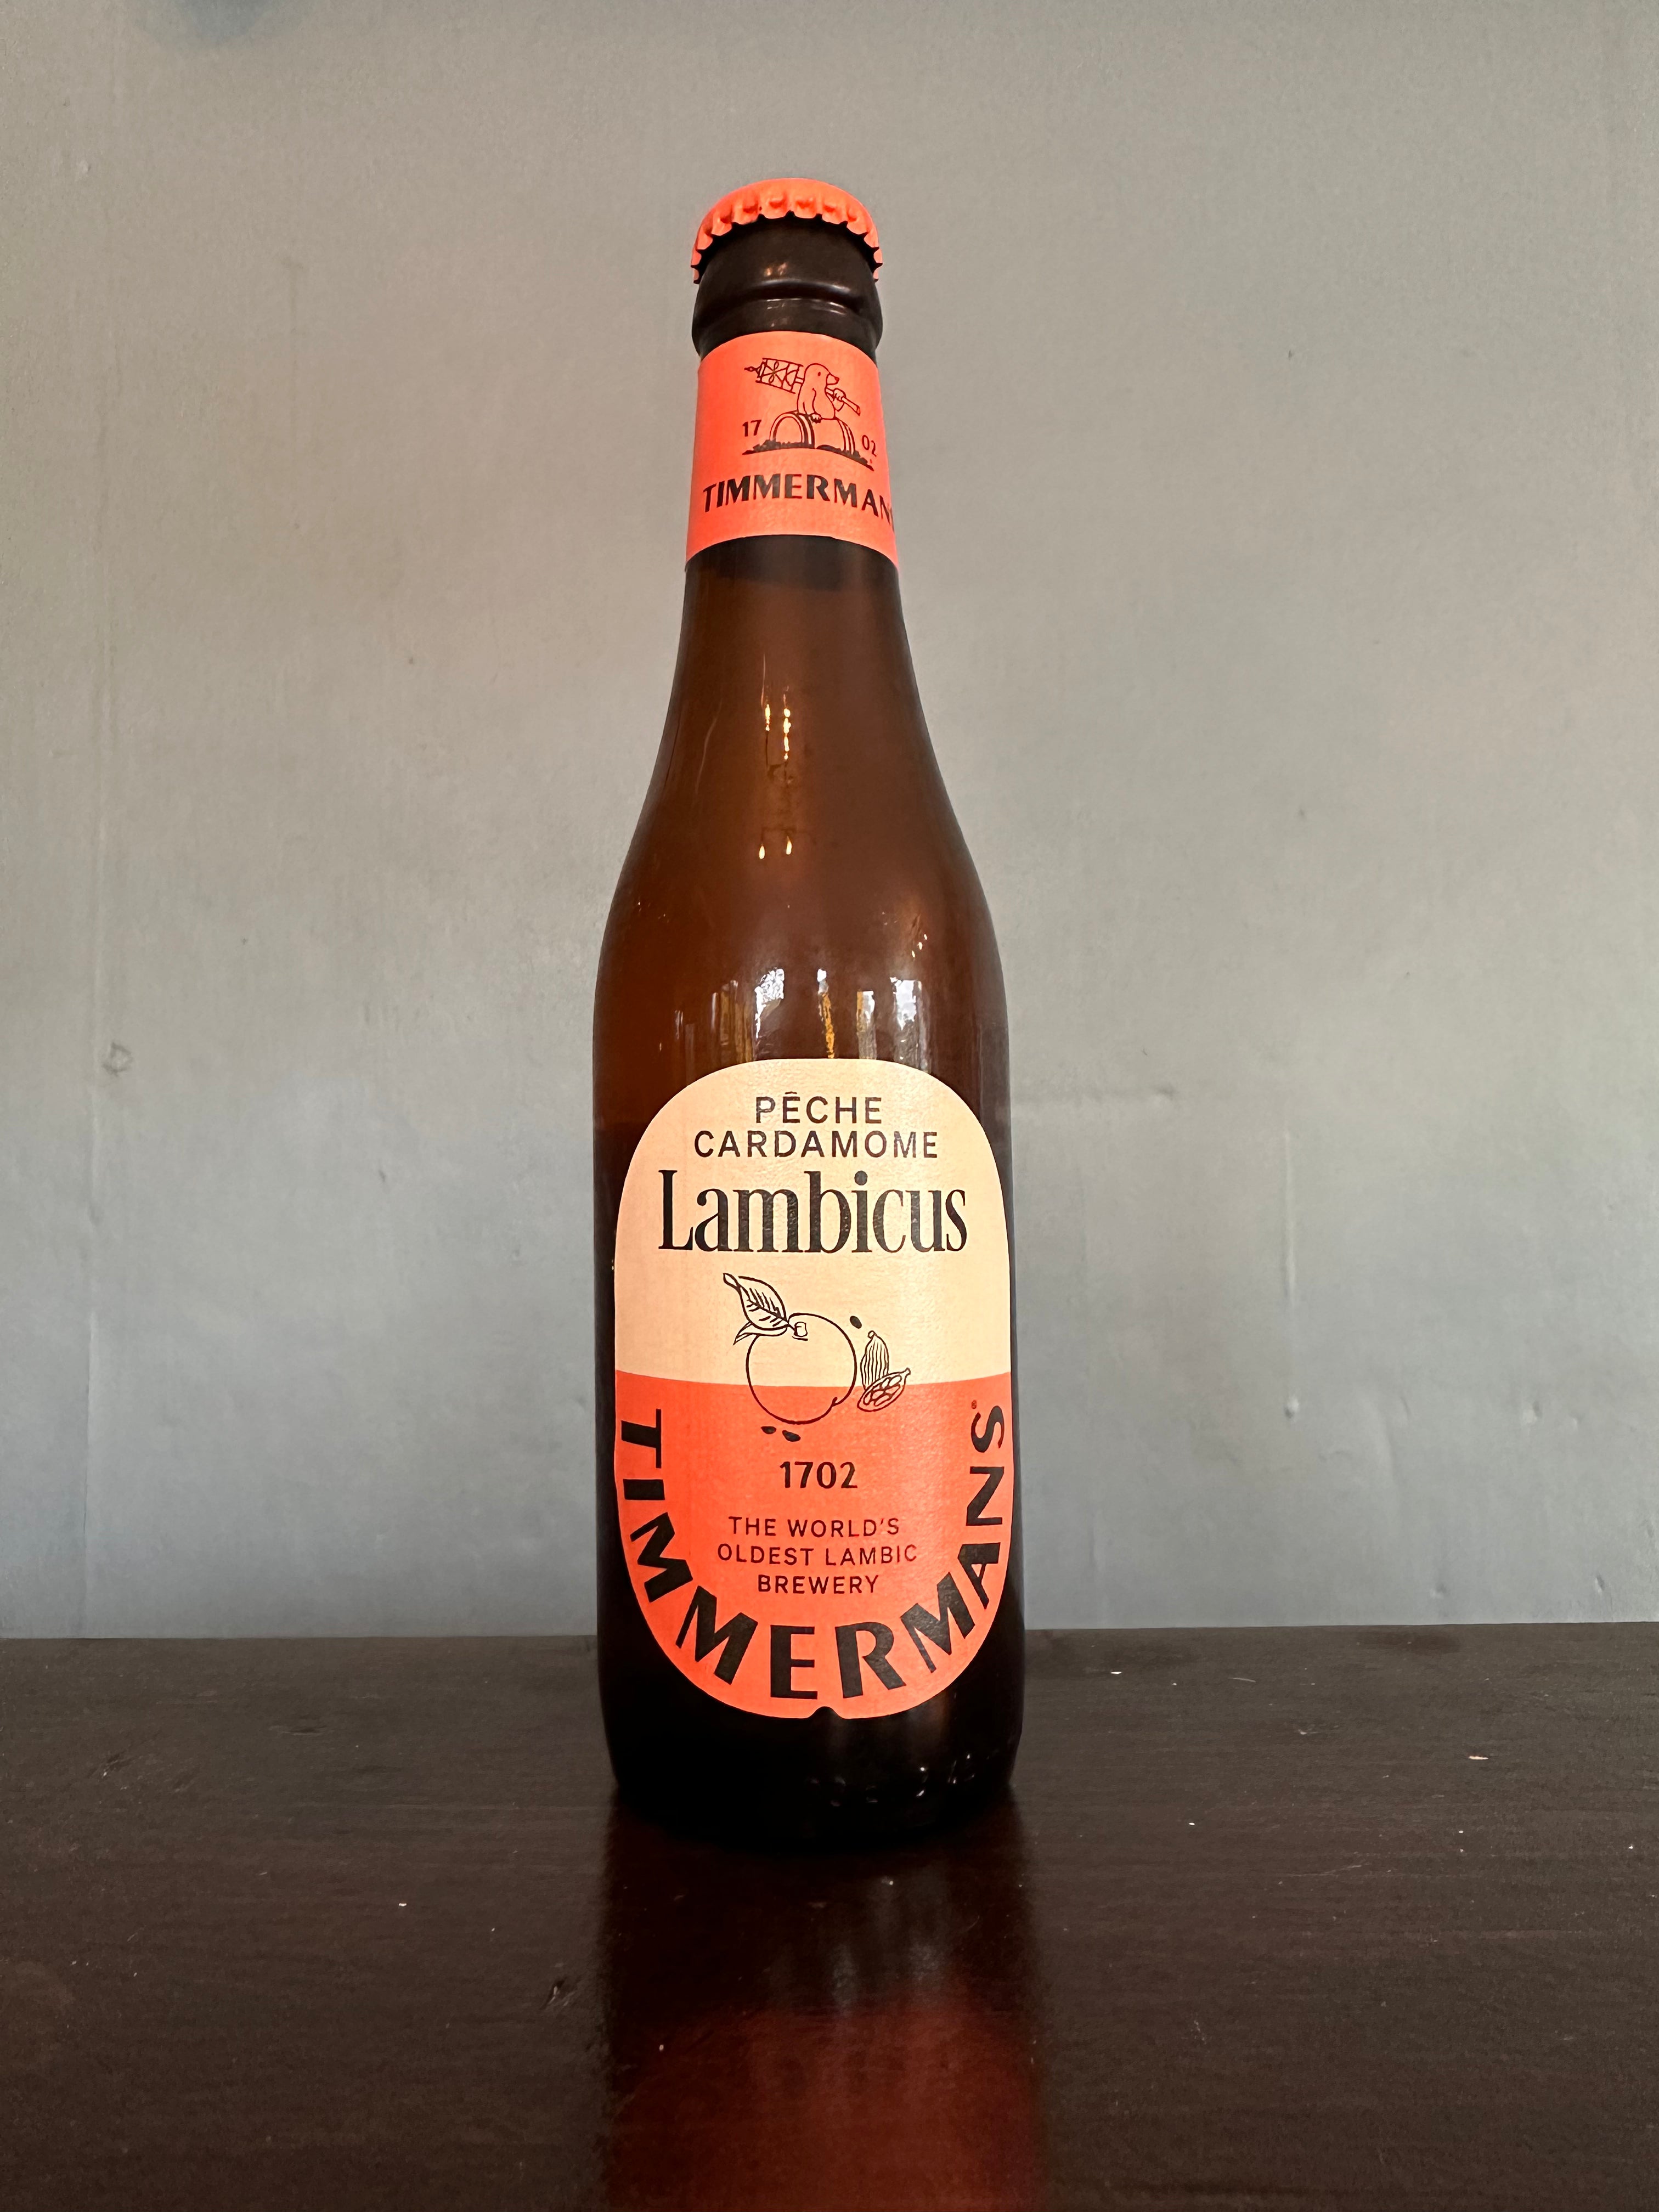 Timmerman’s Peach and Cardamom Lambic Beer 4%